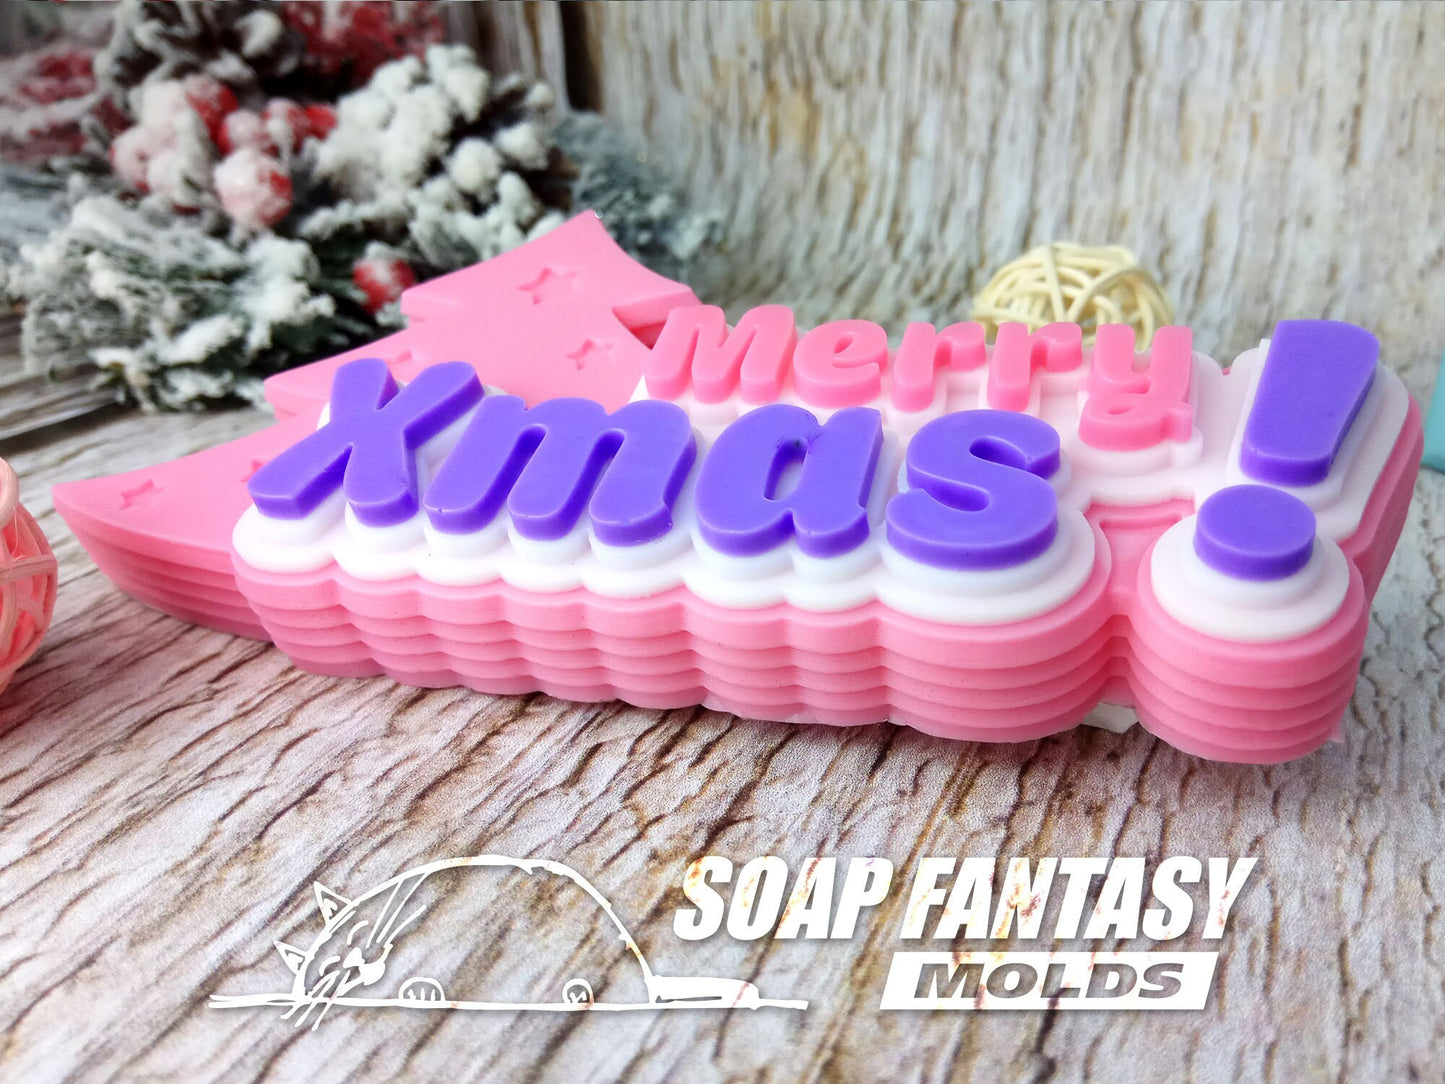 Merry Xmas with a Christmas tree silicone mold for soap making